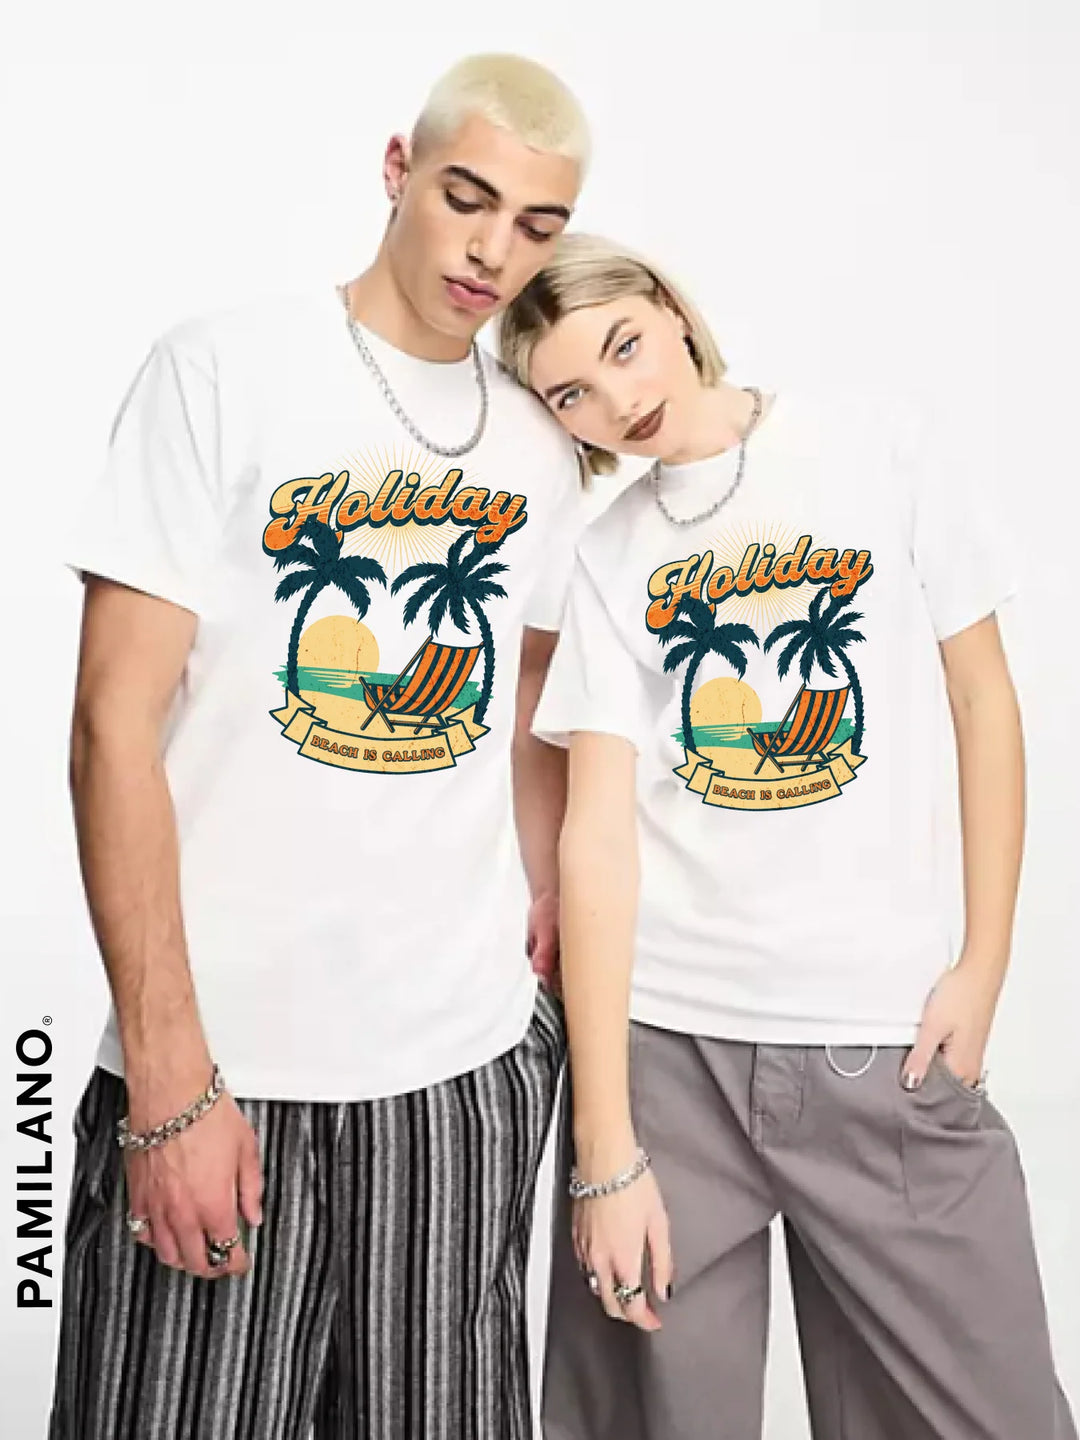 Holiday - Beach is Calling  - Unisex T-Shirt